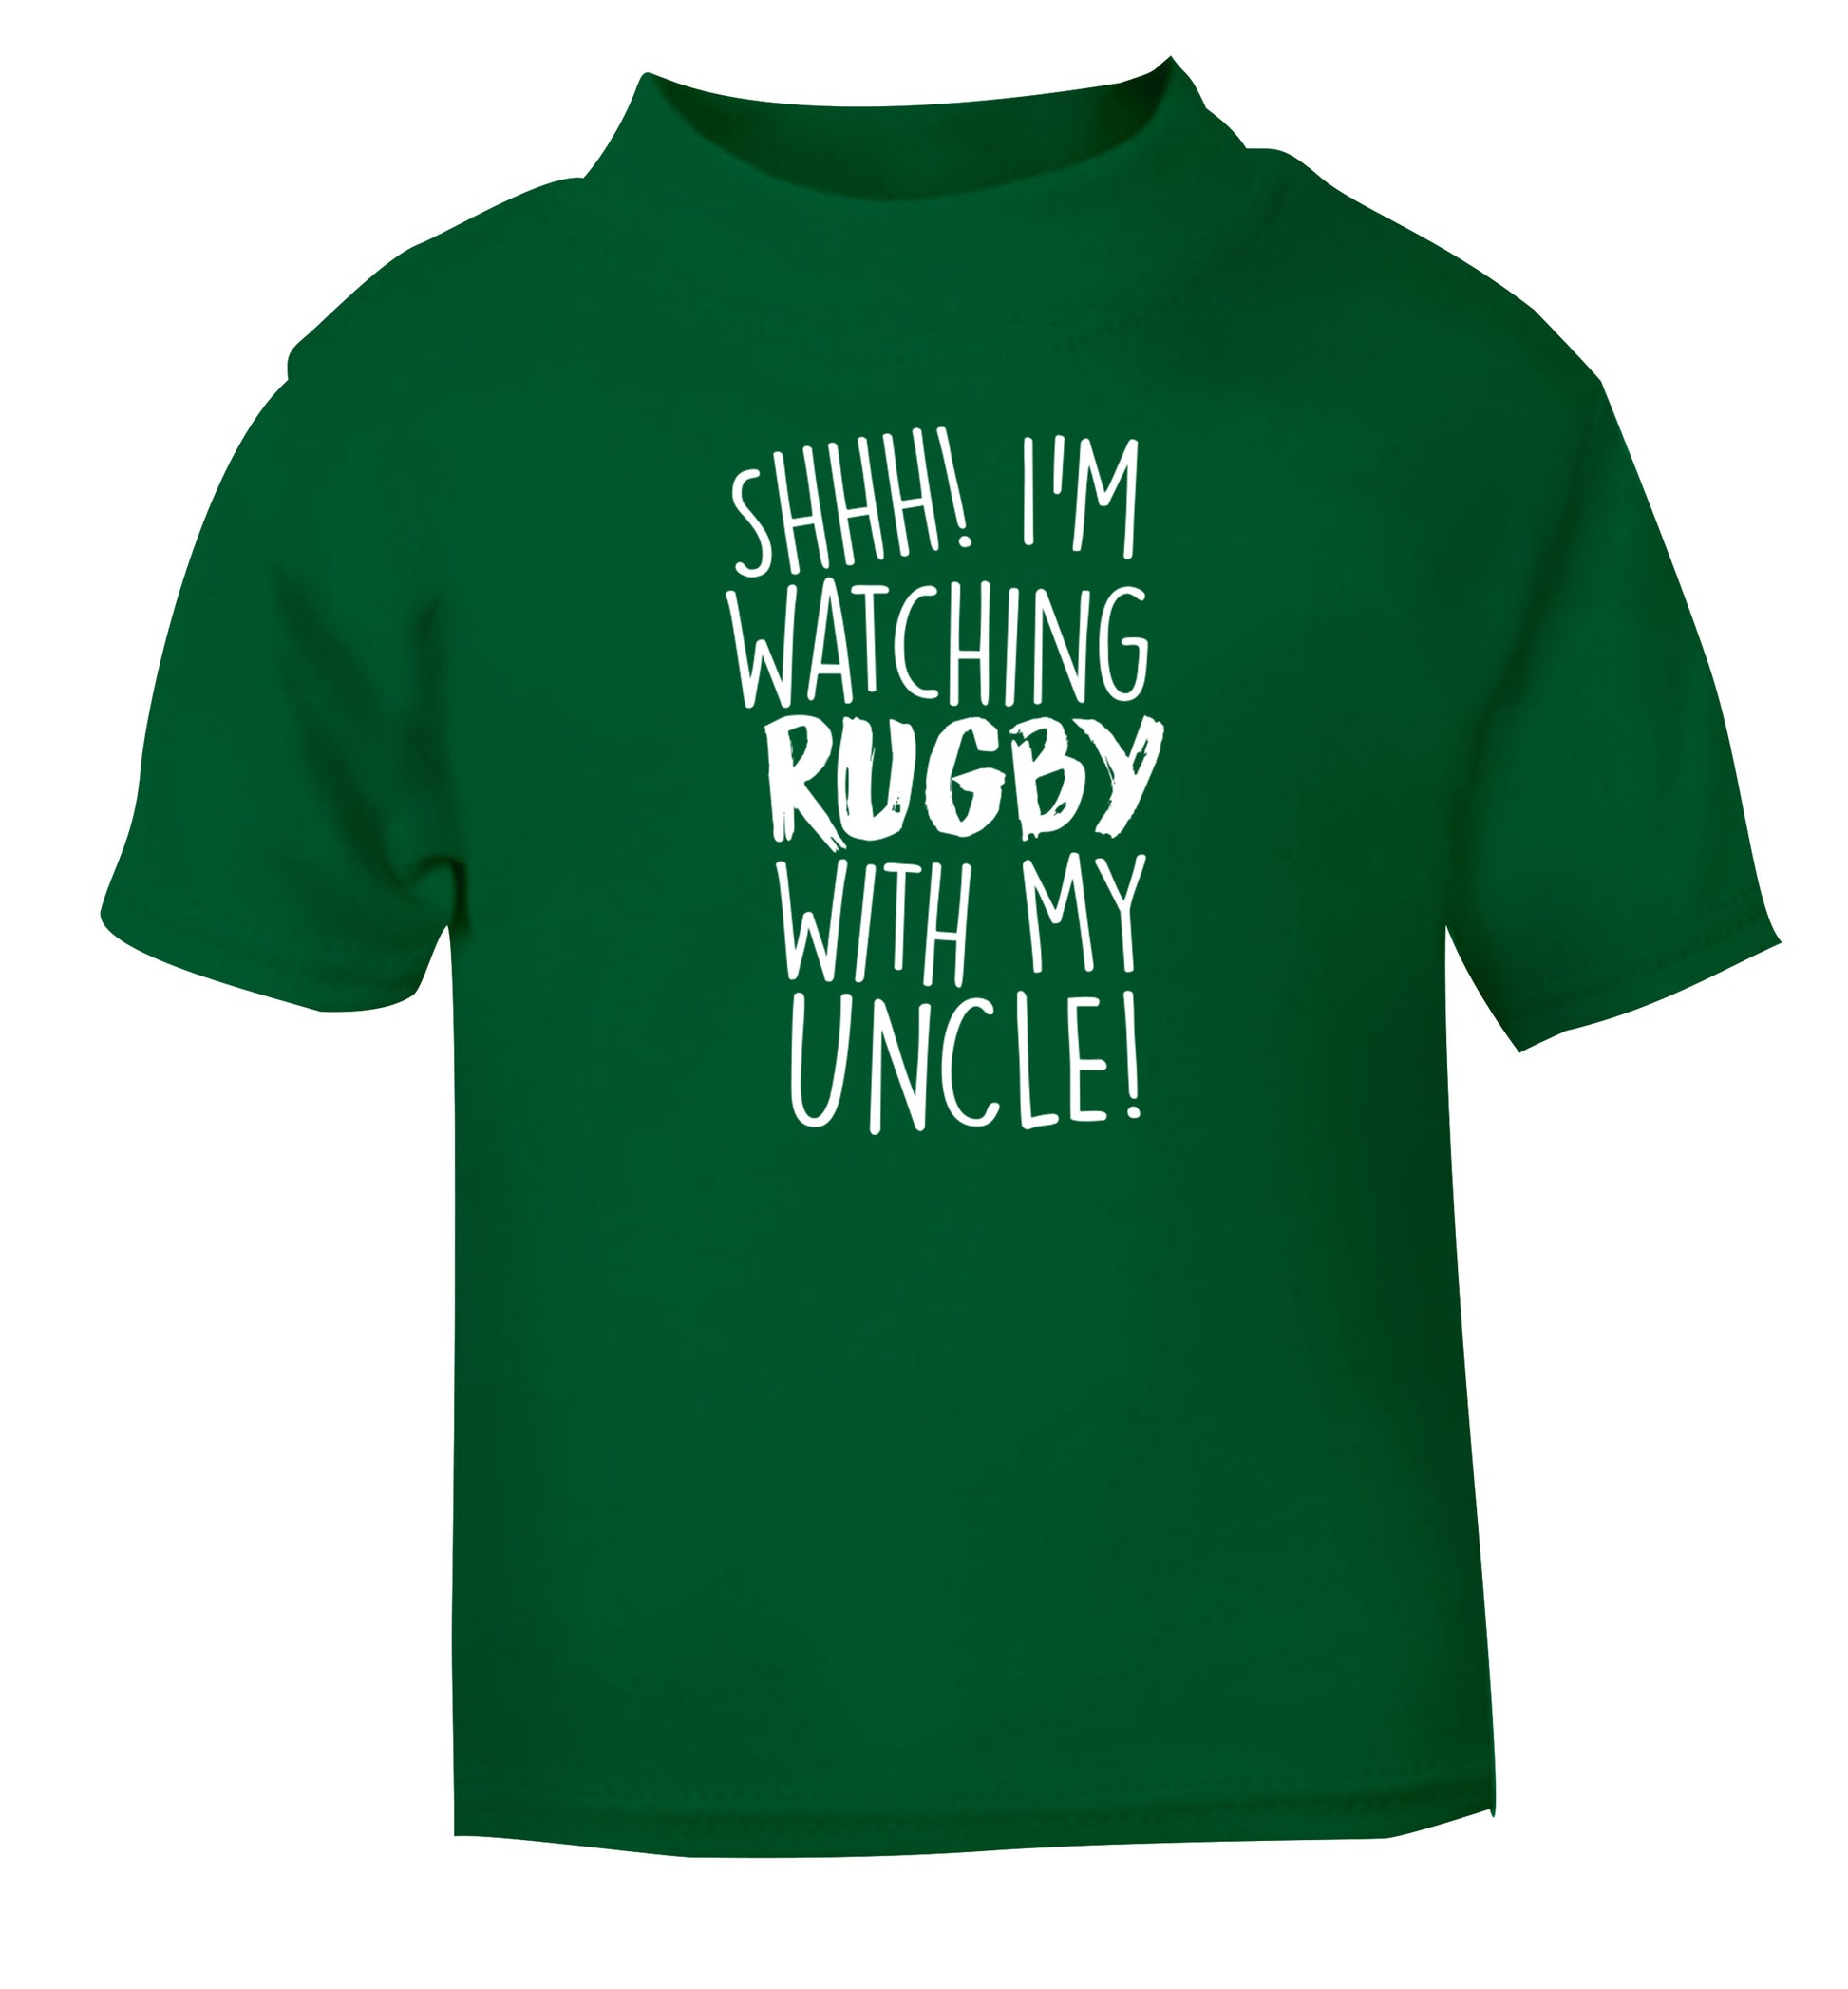 Shh.. I'm watching rugby with my uncle green Baby Toddler Tshirt 2 Years